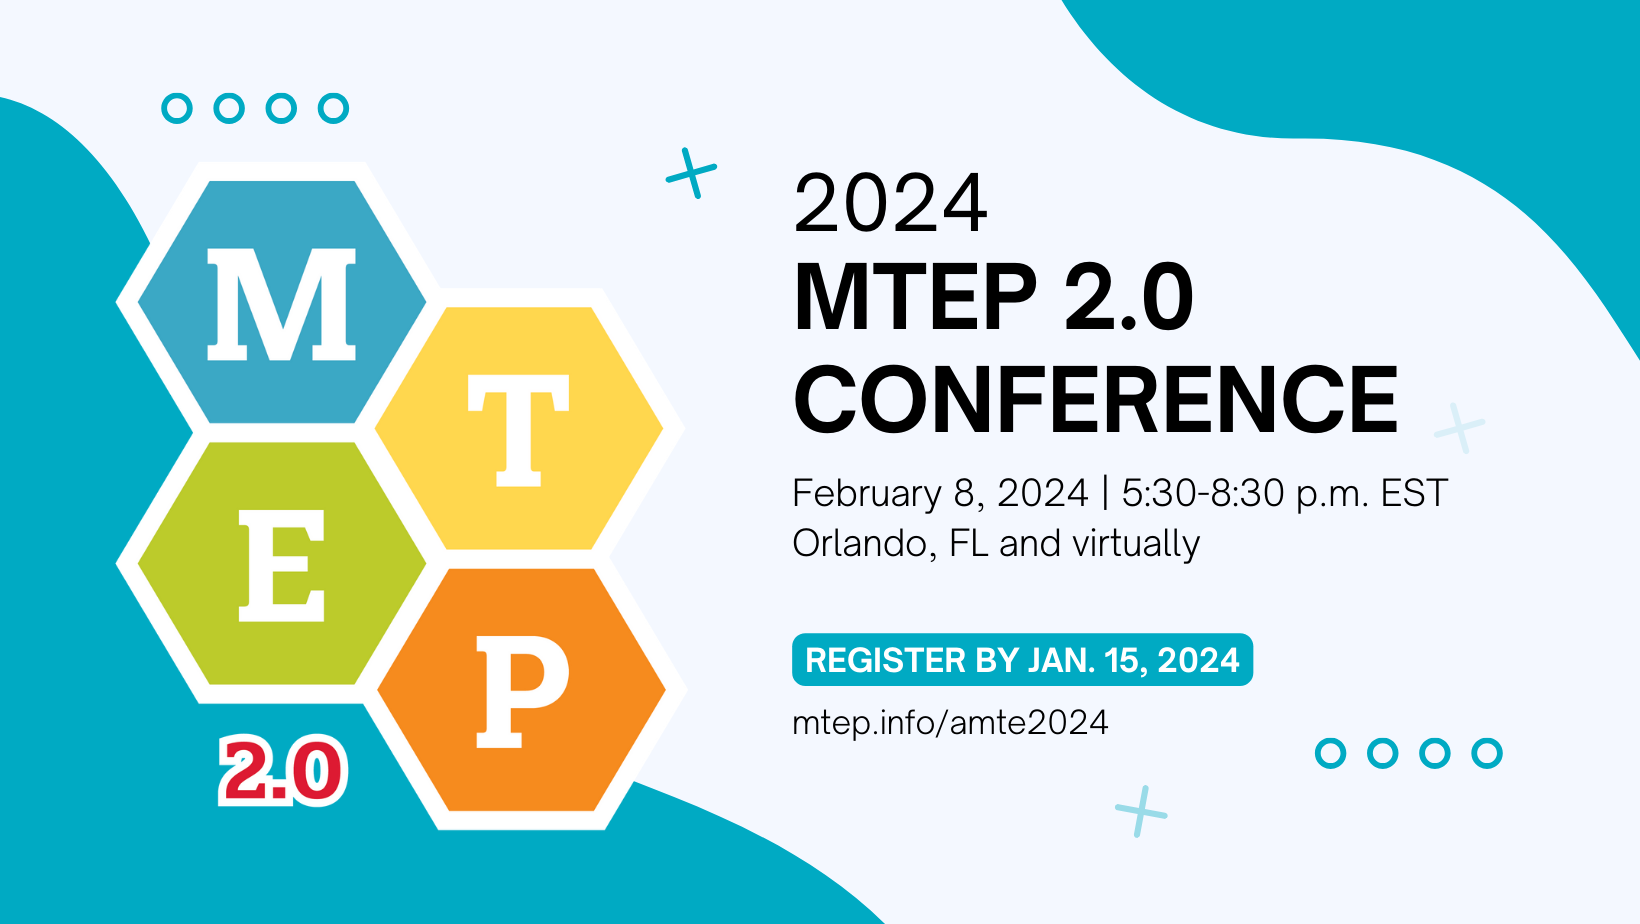 The 2024 MTEP Conference will be held on Thursday evening, February 8, 2024, during the 2024 AMTE Annual Conference at the same venue. 